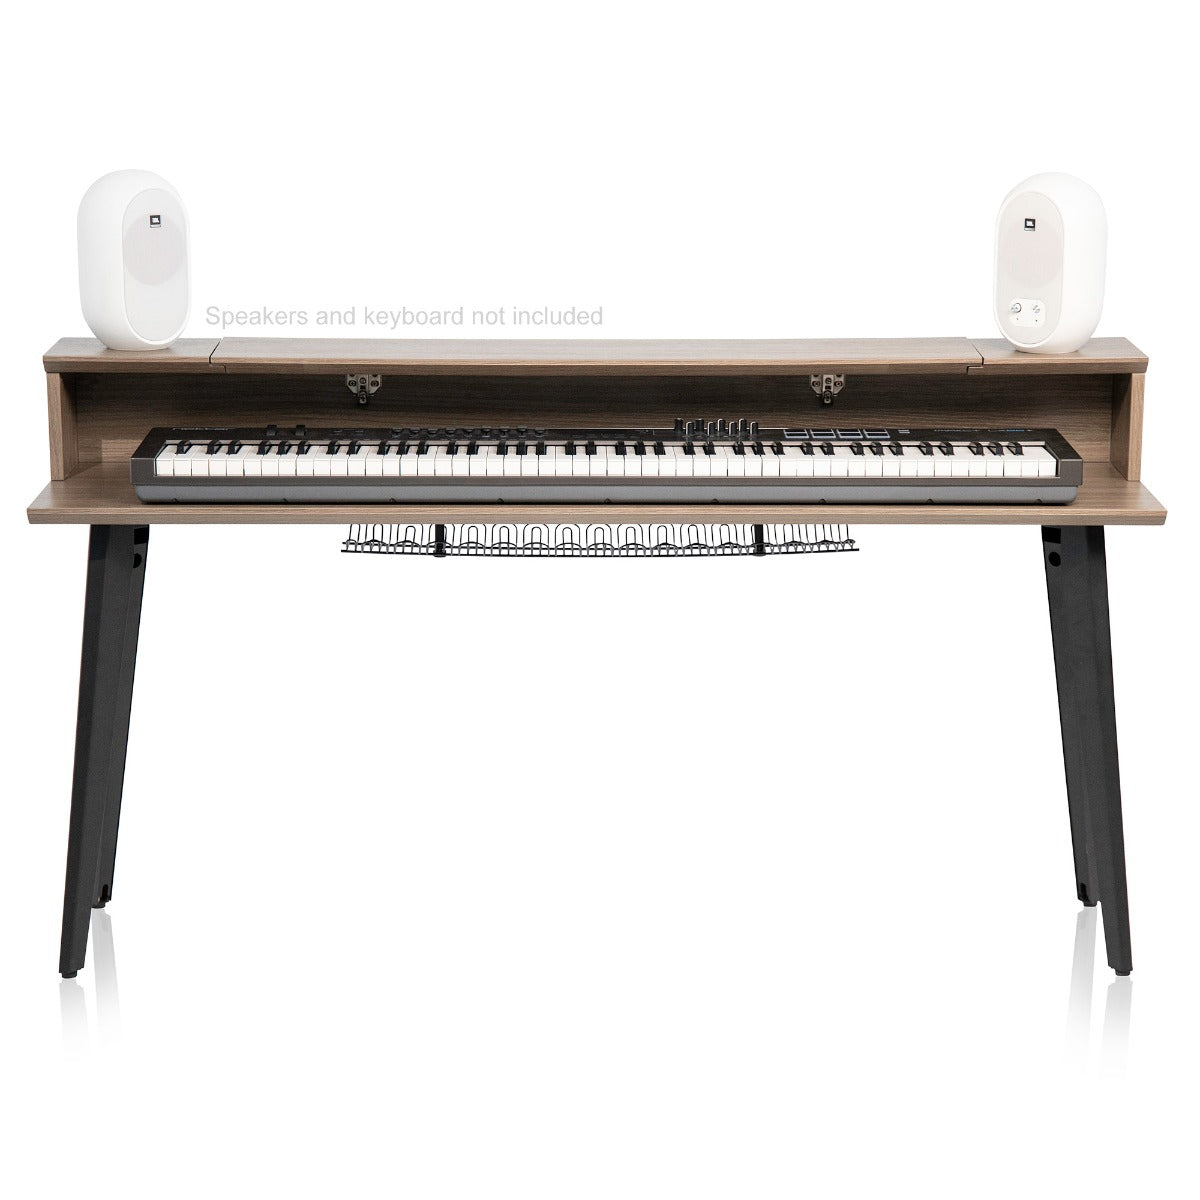 Image of the Gator Frameworks Elite Series Keyboard Furniture 88 Note - Grey with keyboard and speakers on it